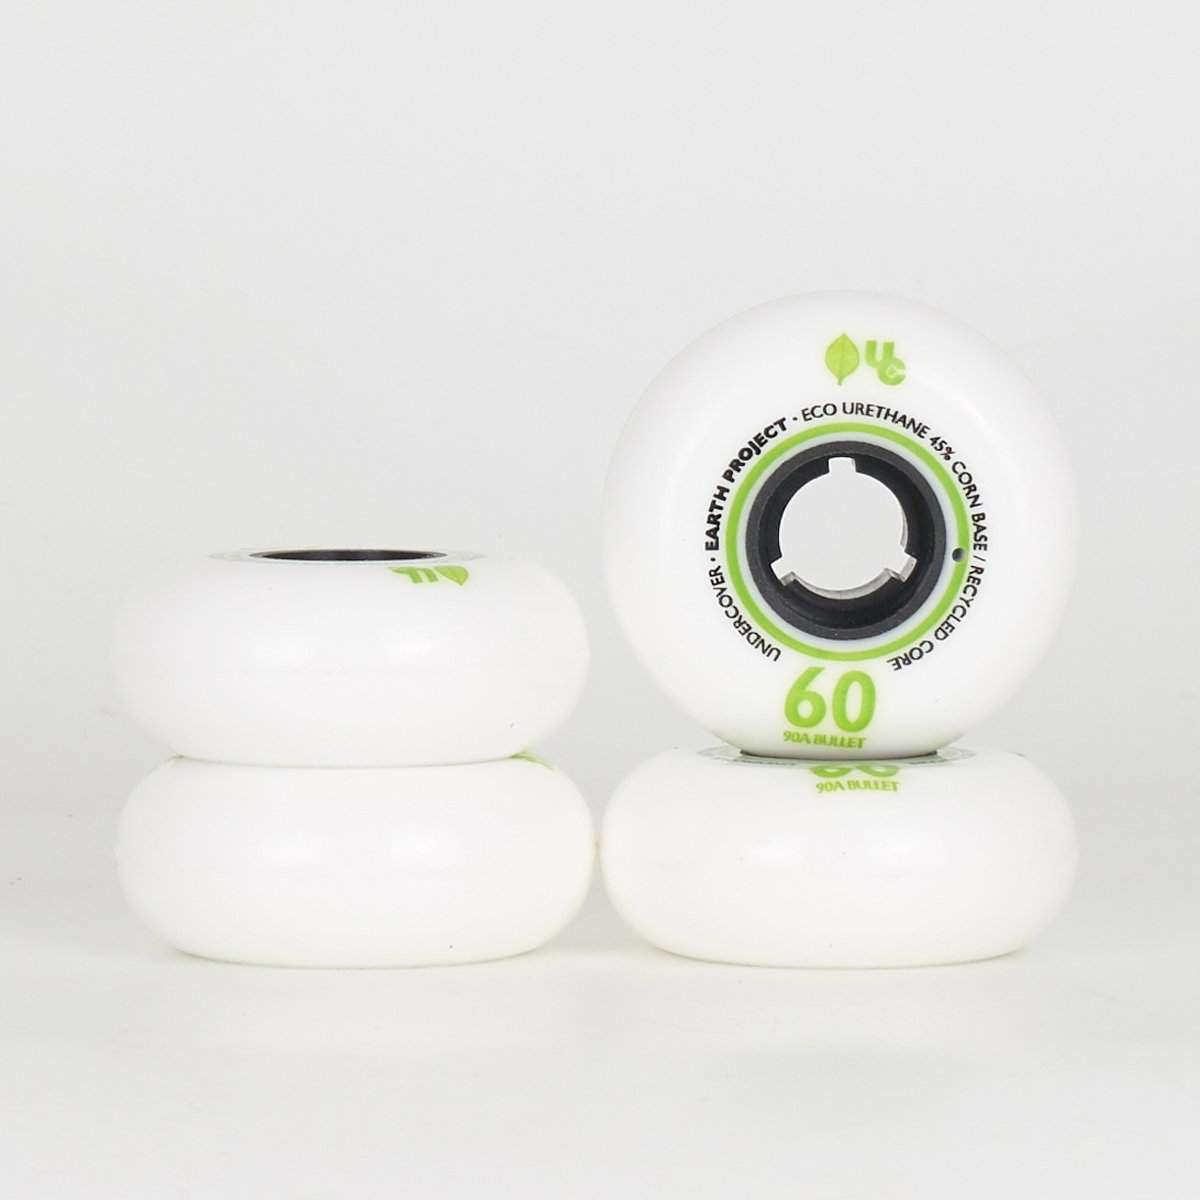 Undercover Earth Project 60mm / 90a - White - (4 Pack)-Undercover Wheels-60mm,atcUpsellCol:upsellwheels,white